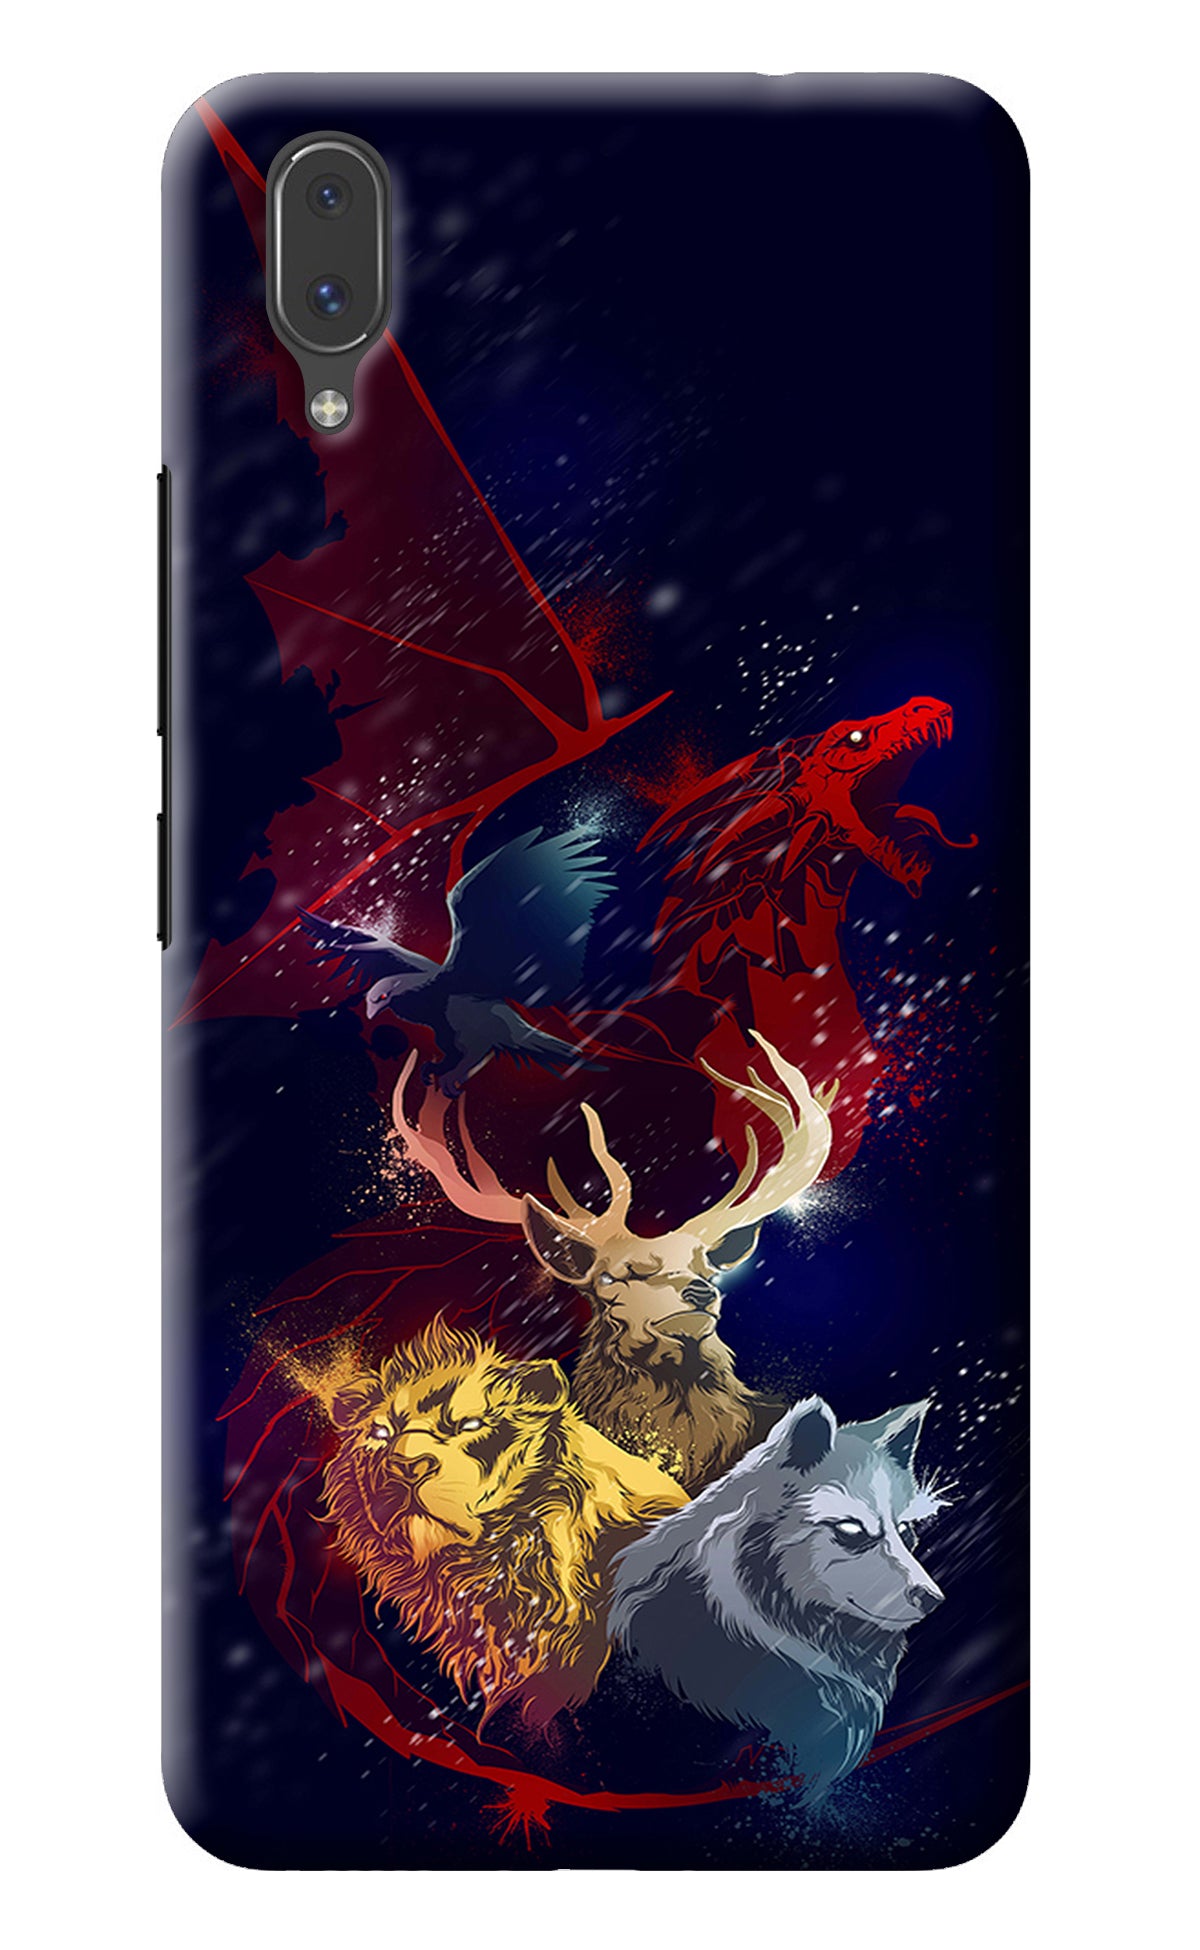 Game Of Thrones Vivo X21 Back Cover